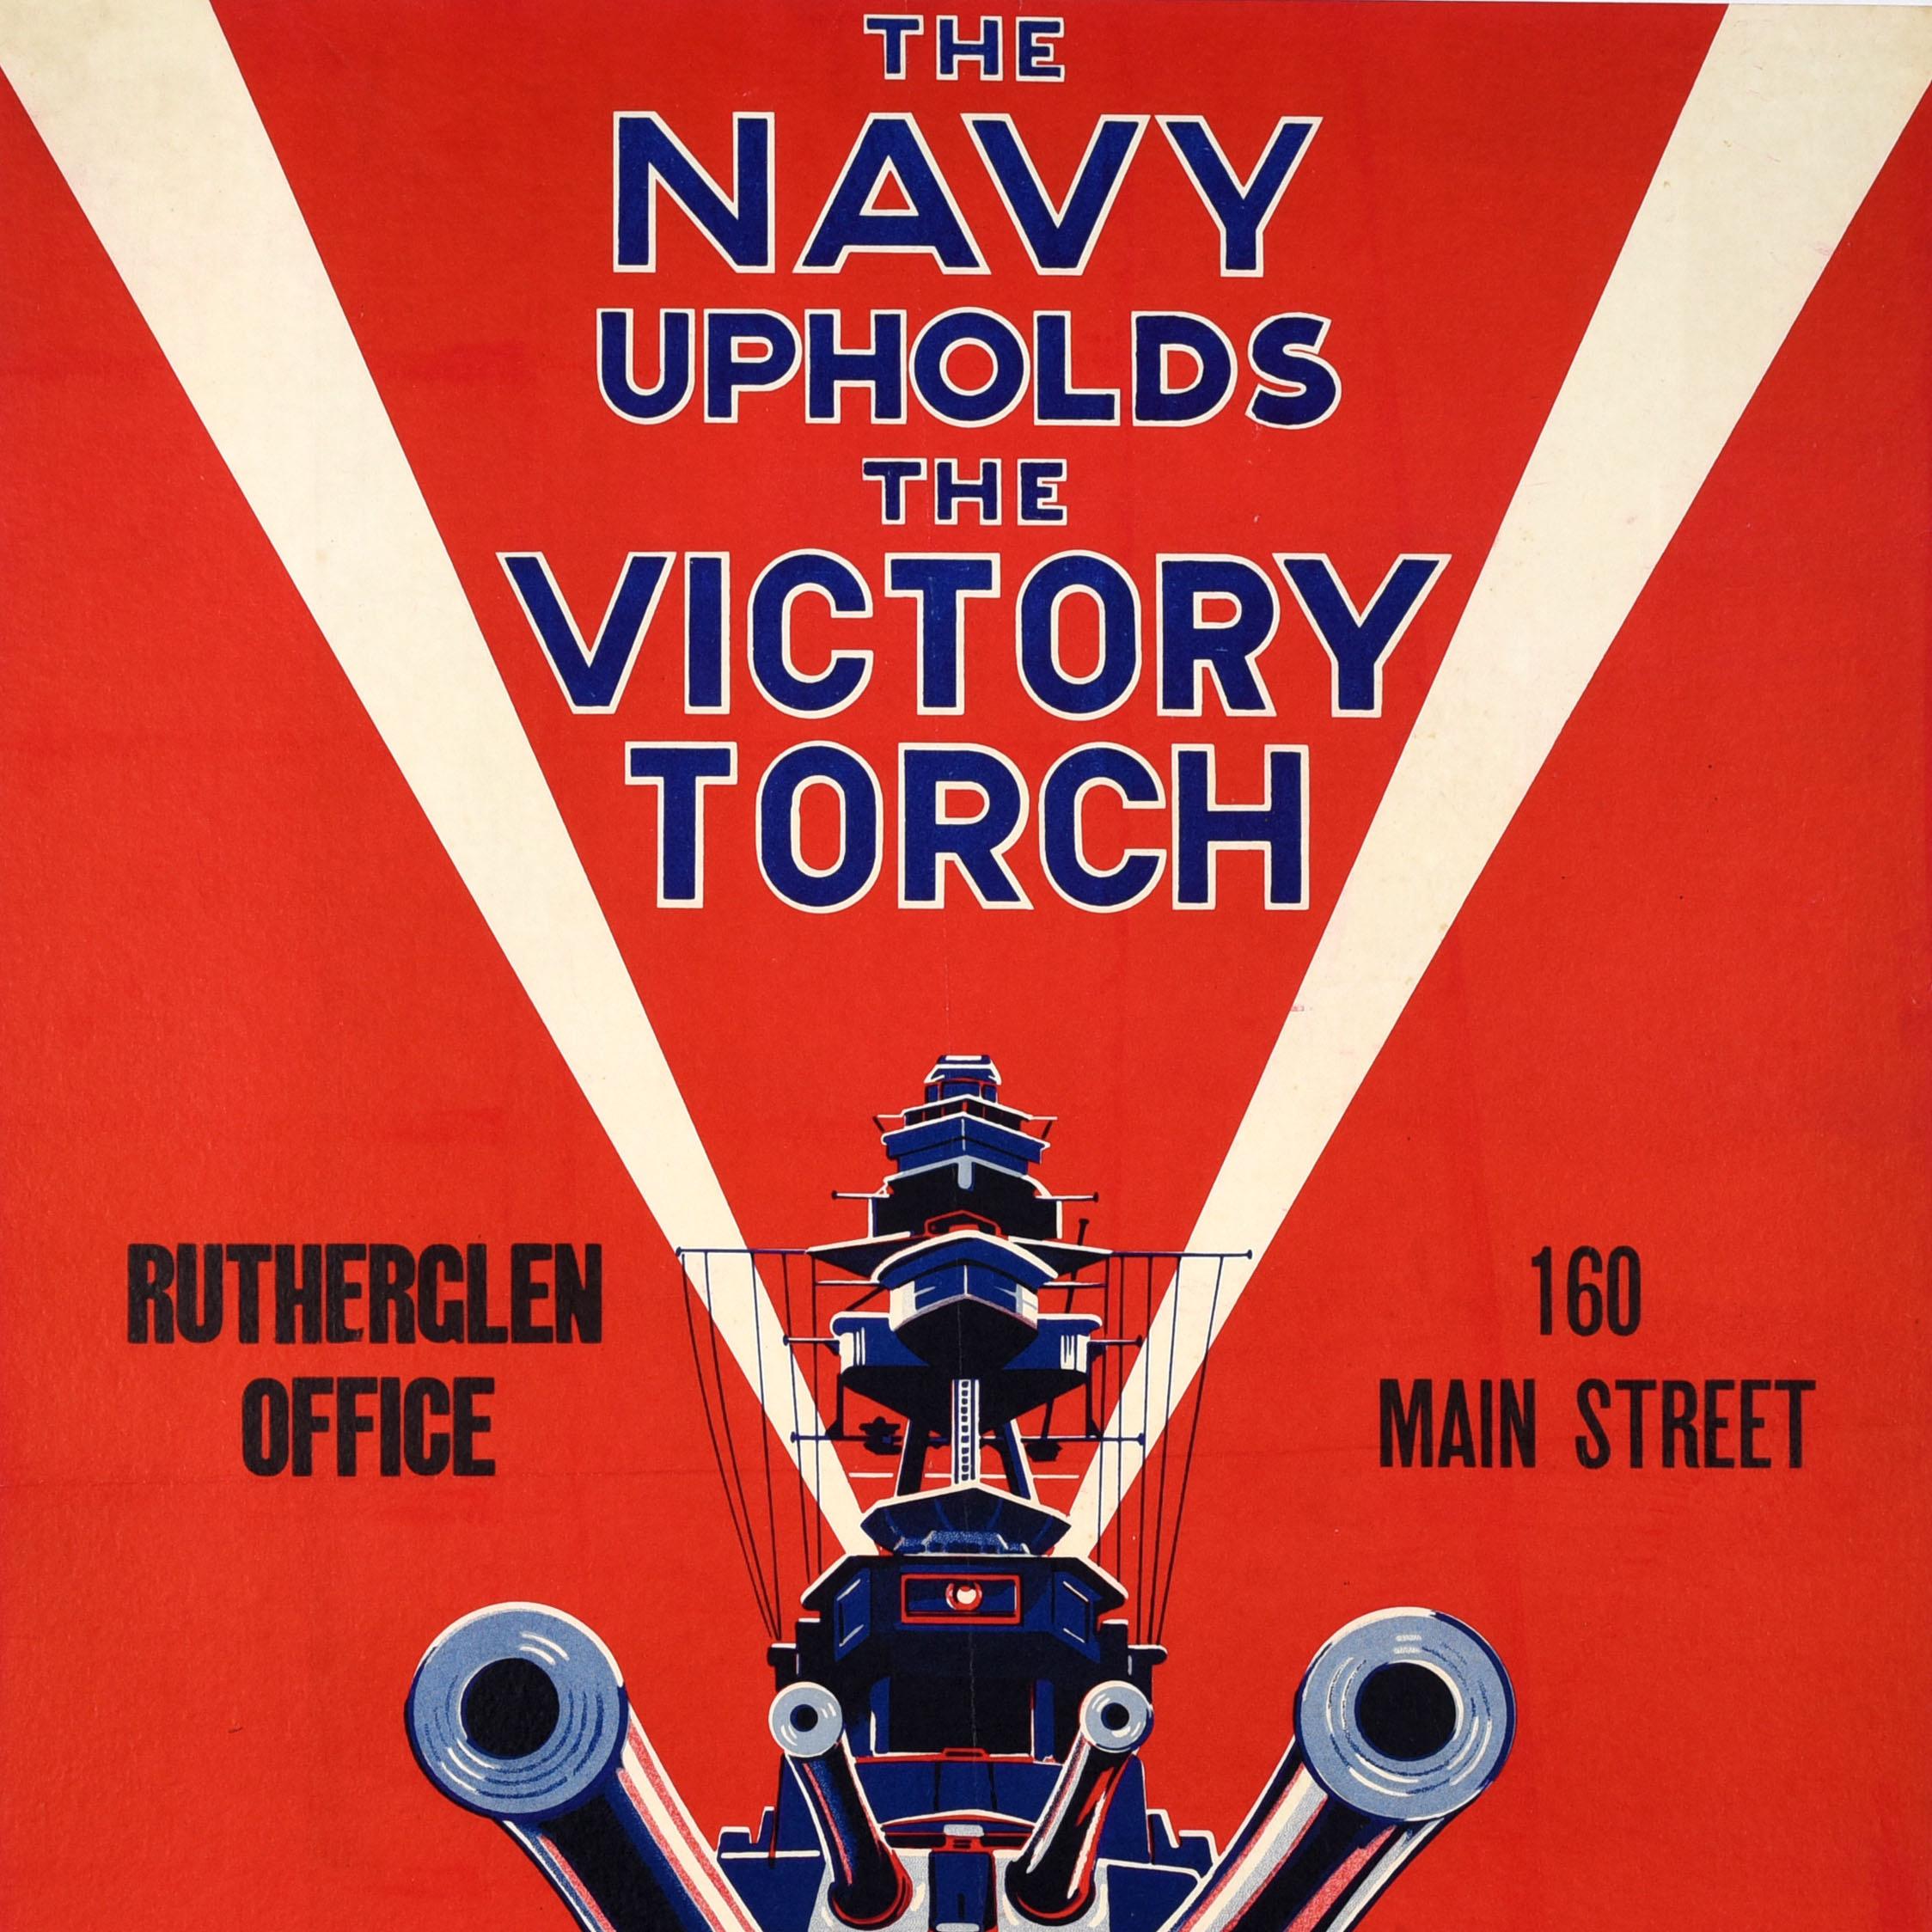 British Original Vintage World War Two Propaganda Poster Navy Upholds Victory Torch WWII For Sale